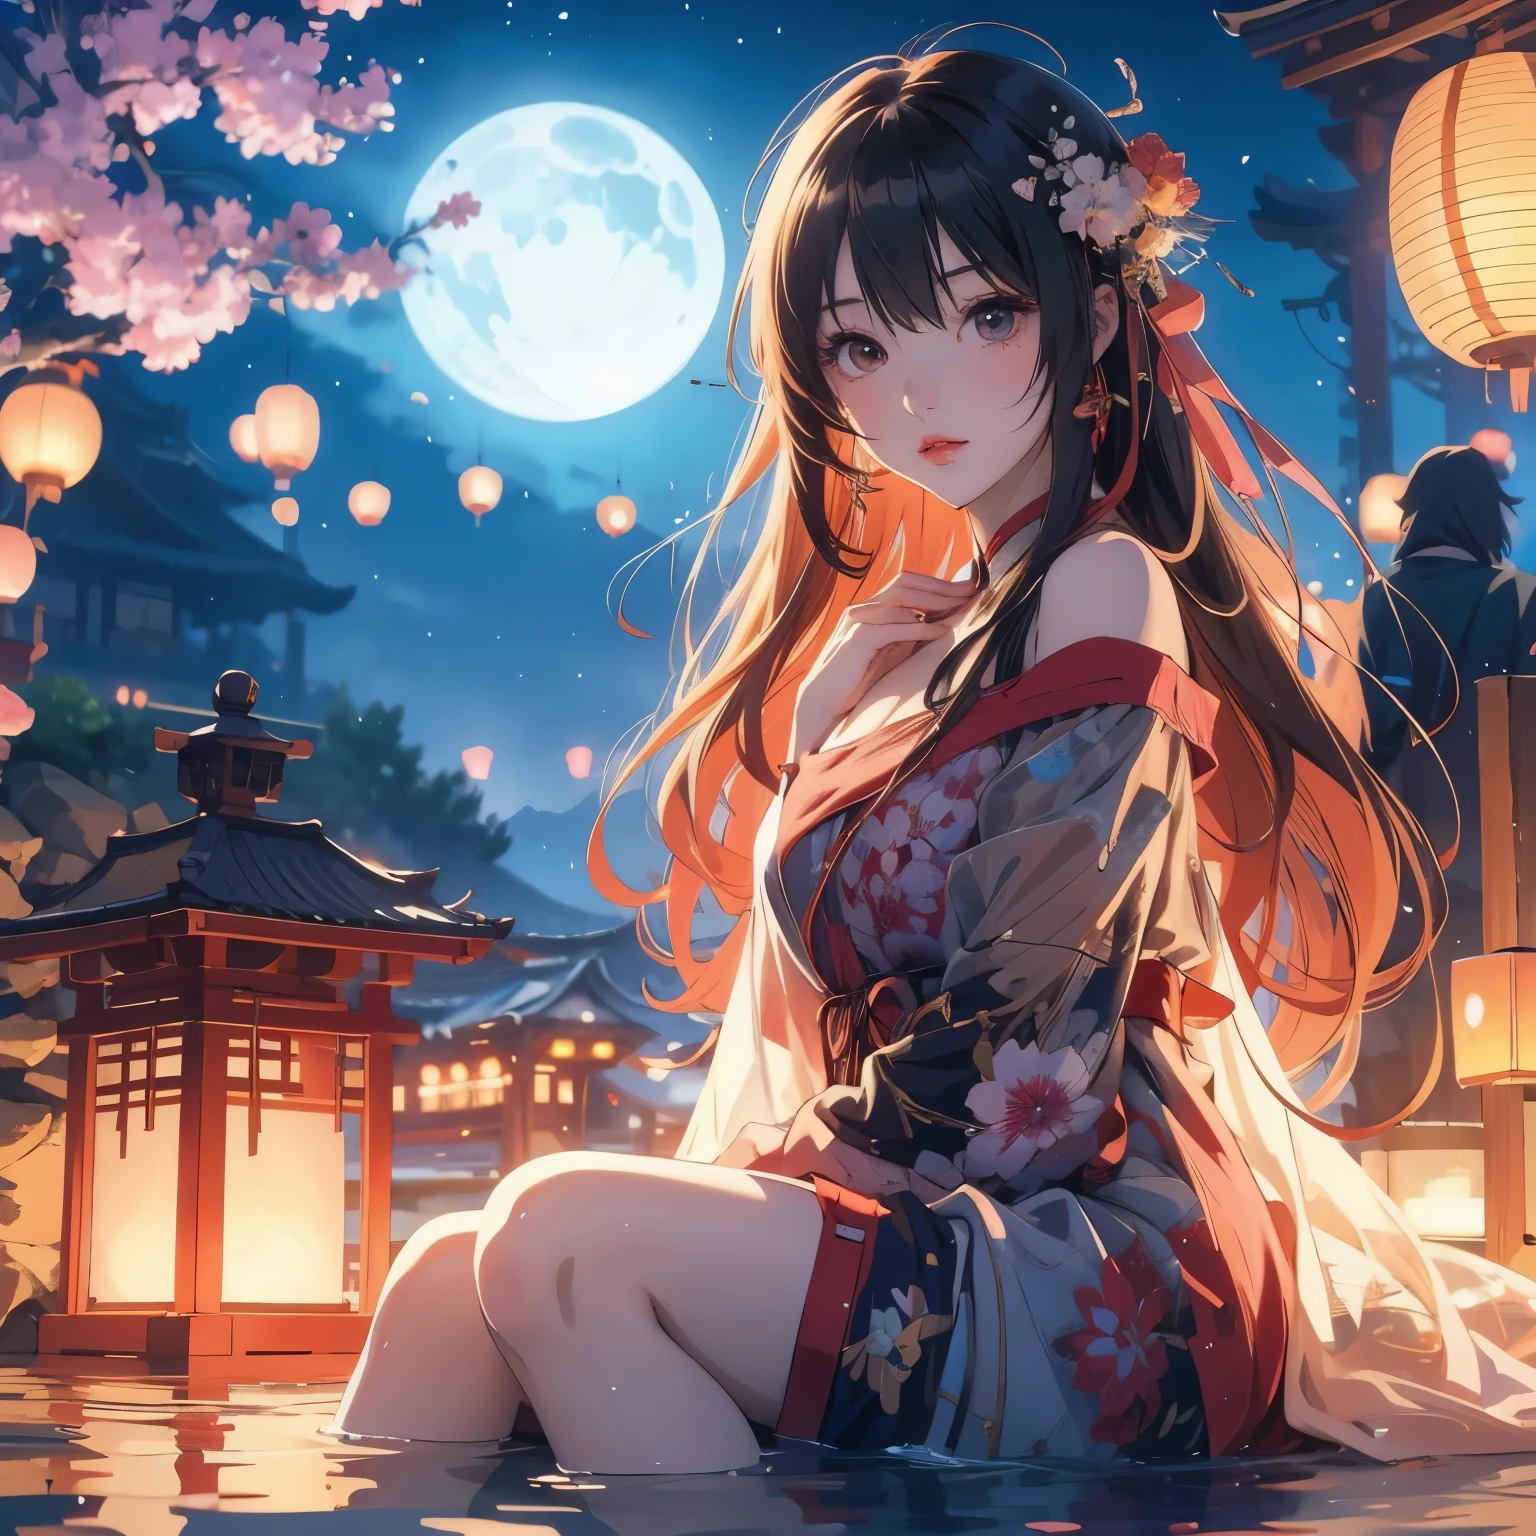 Anime girl sitting in the water，Lanterns and lanterns in the background, anime style 4k, Anime Art Wallpaper 4k, anime art wallpaper 4k, anime wallpaper 4k, anime wallpaper 4k, anime art wallpaper 8k, 4k anime wallpaper, night nucleus, Beautiful anime girl, Beautiful anime, anime girl desktop background, anime background, HD anime wallpaper, anime pictures